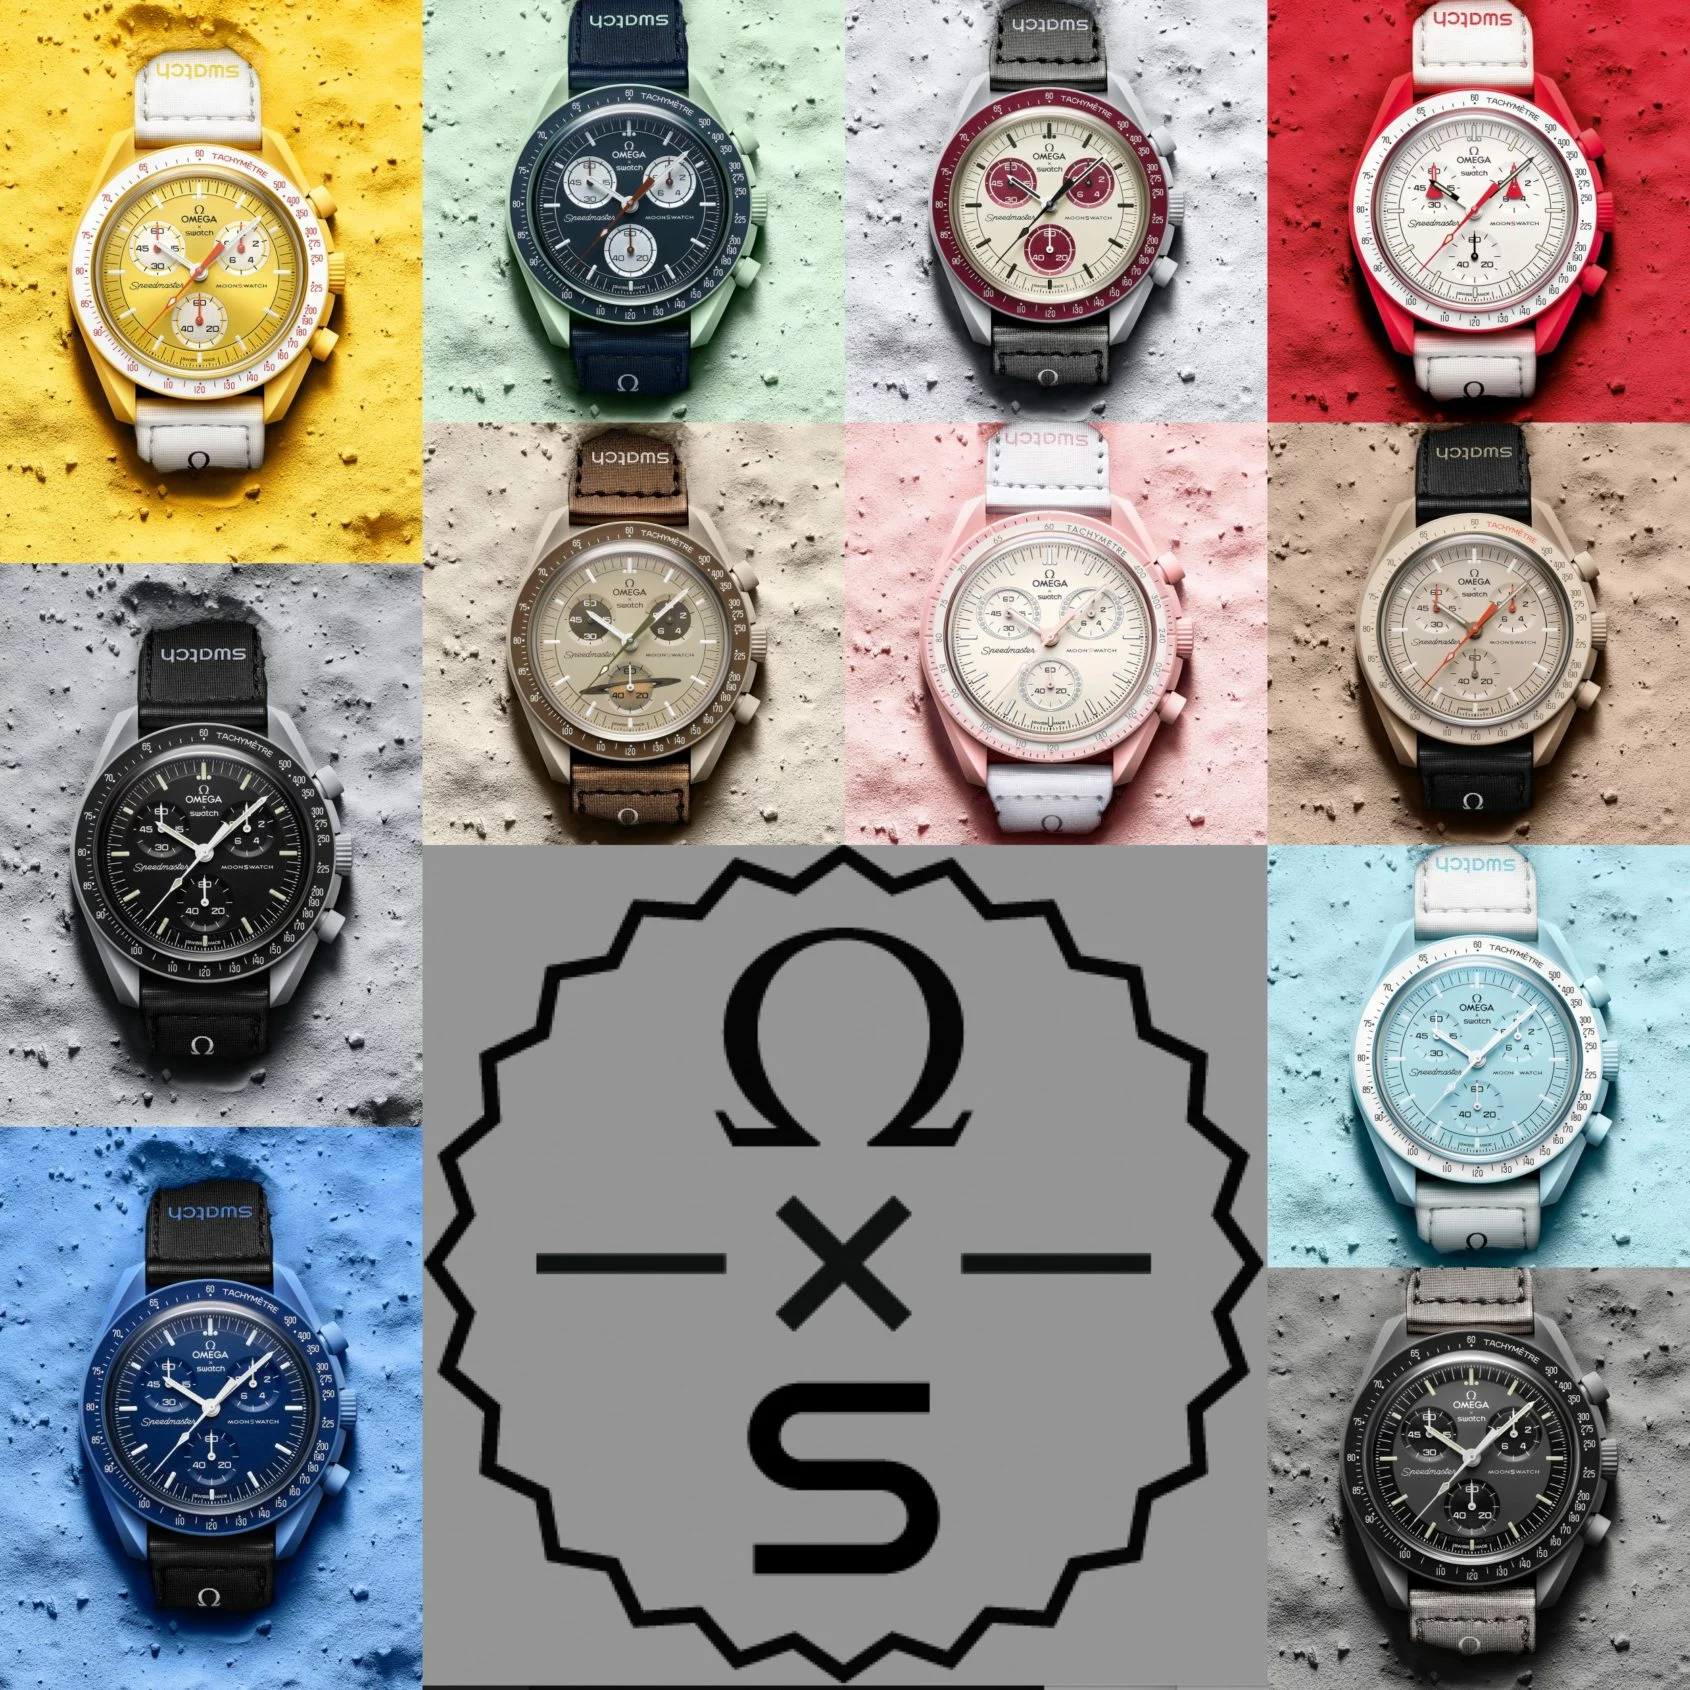 Why are consumers over the moon with the Swatch X OMEGA collab?